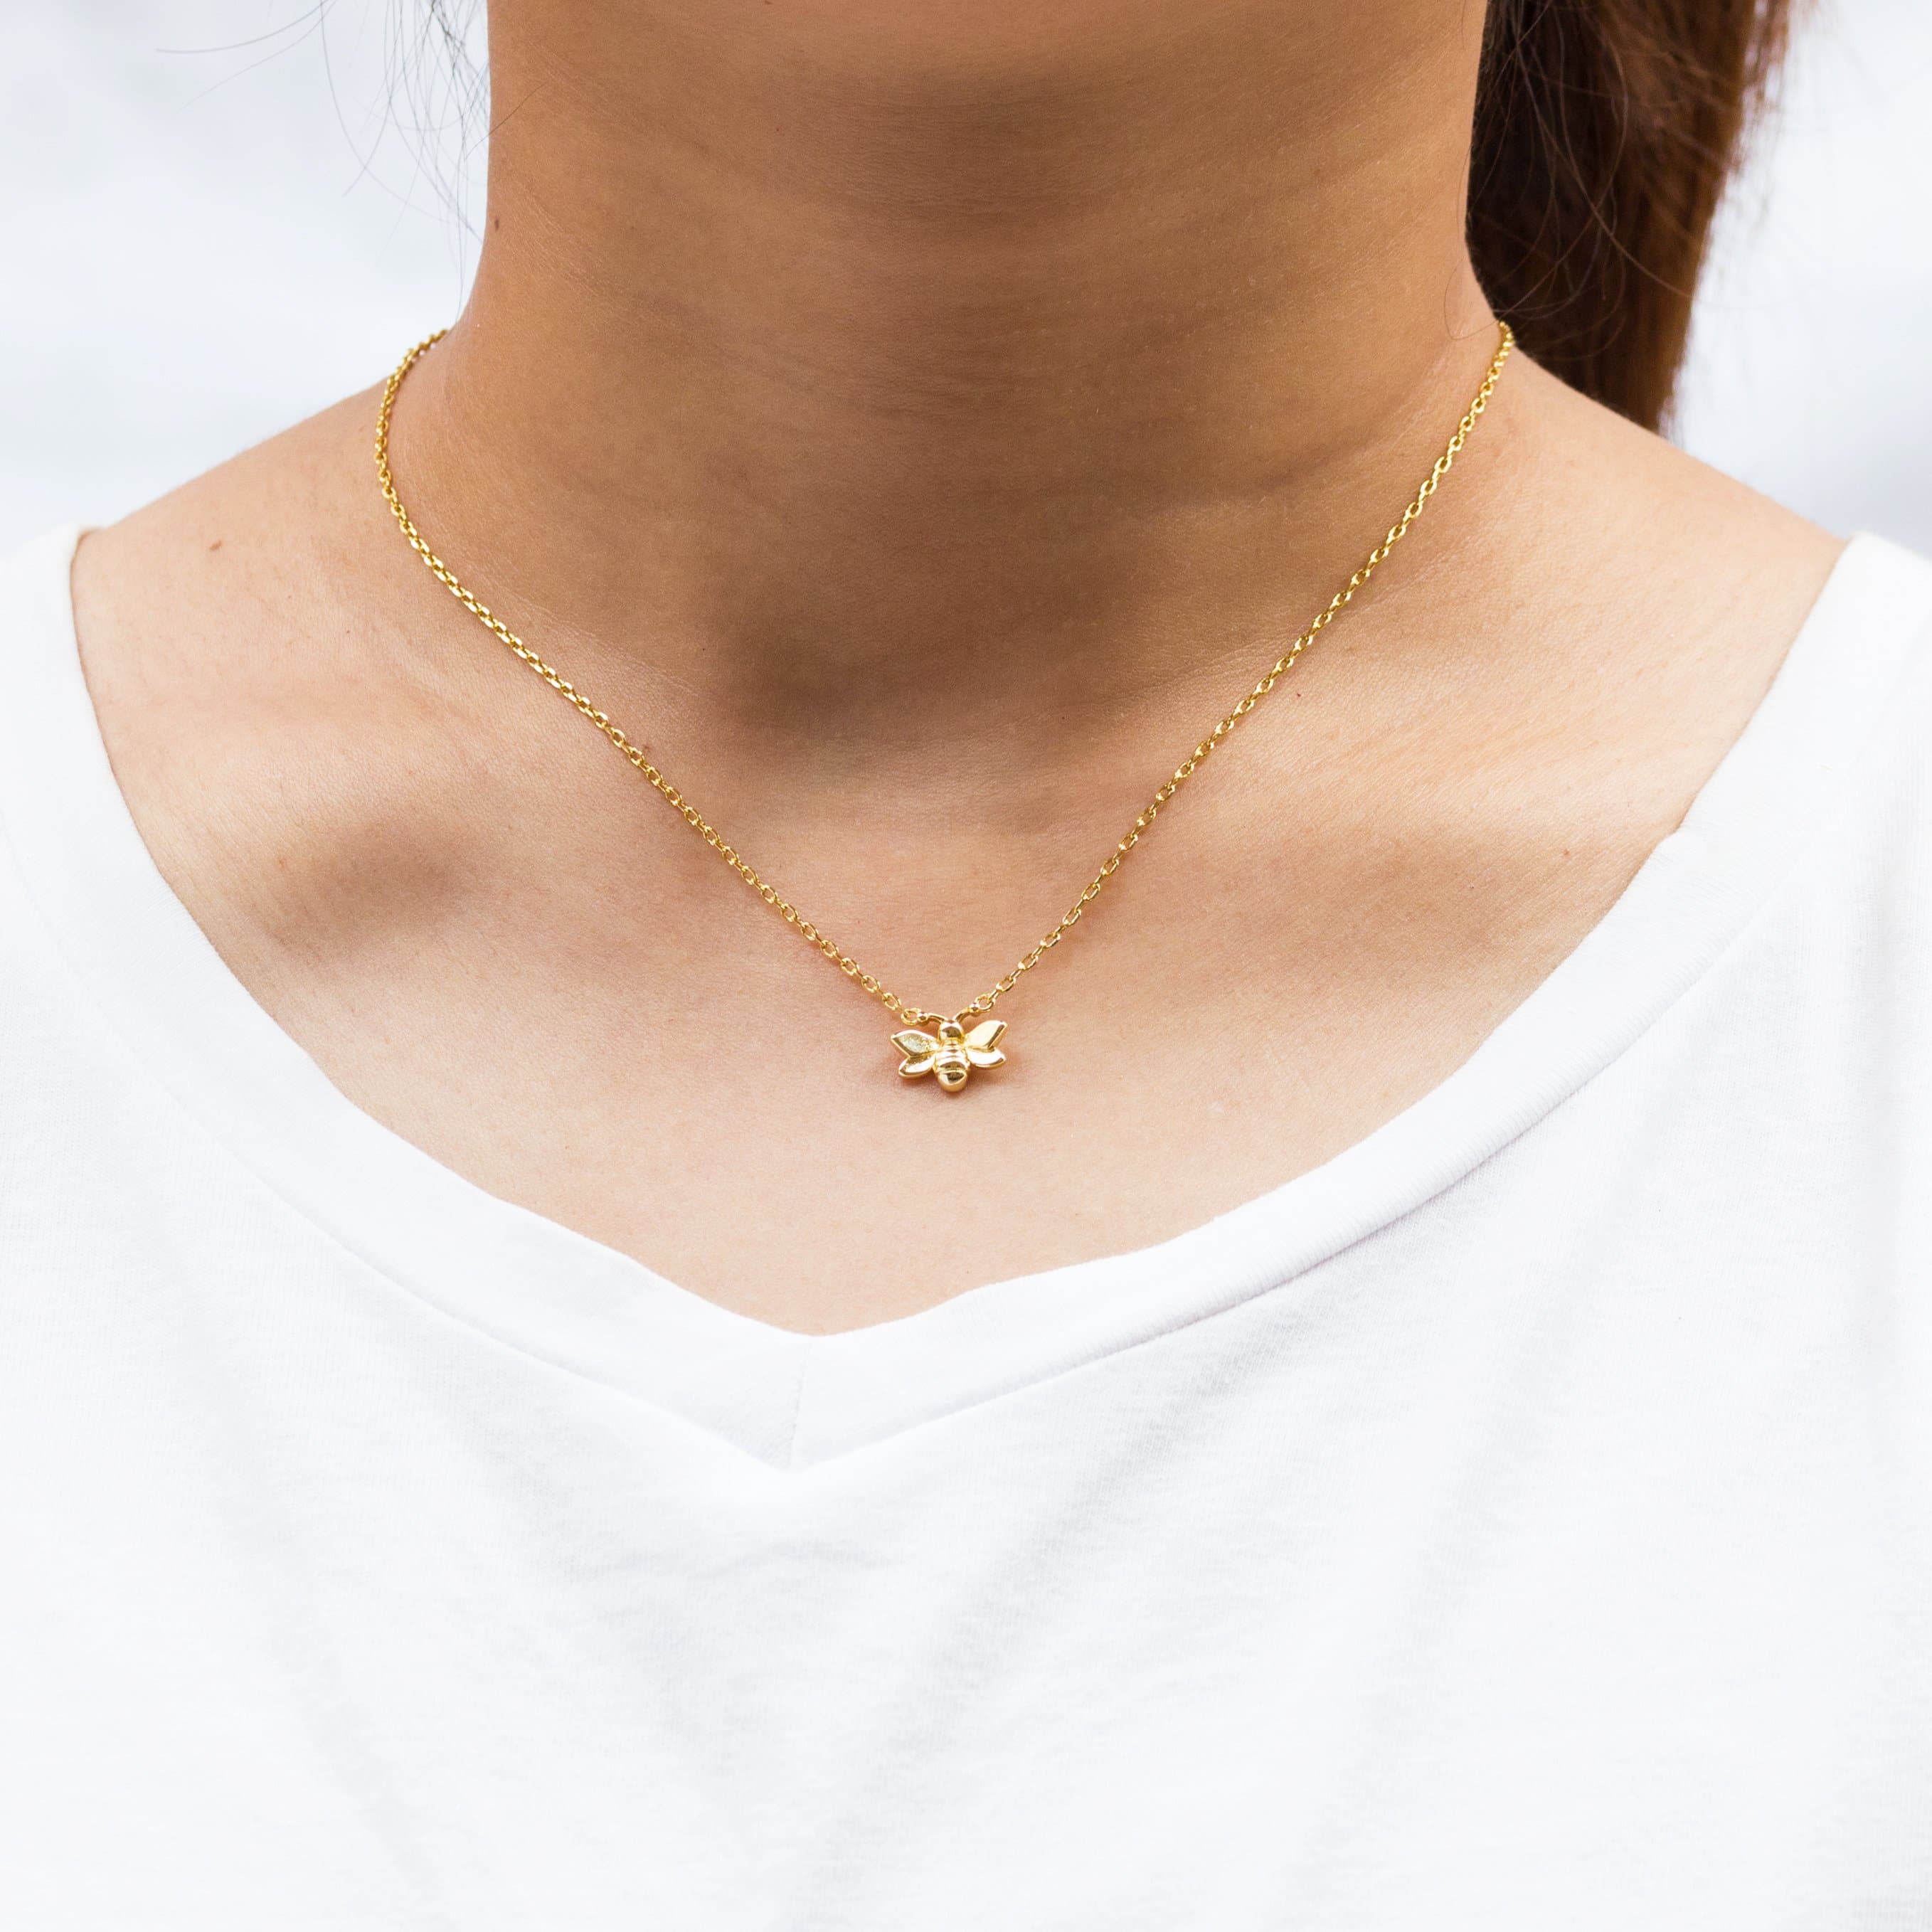 Gold Plated Bumble Bee Necklace